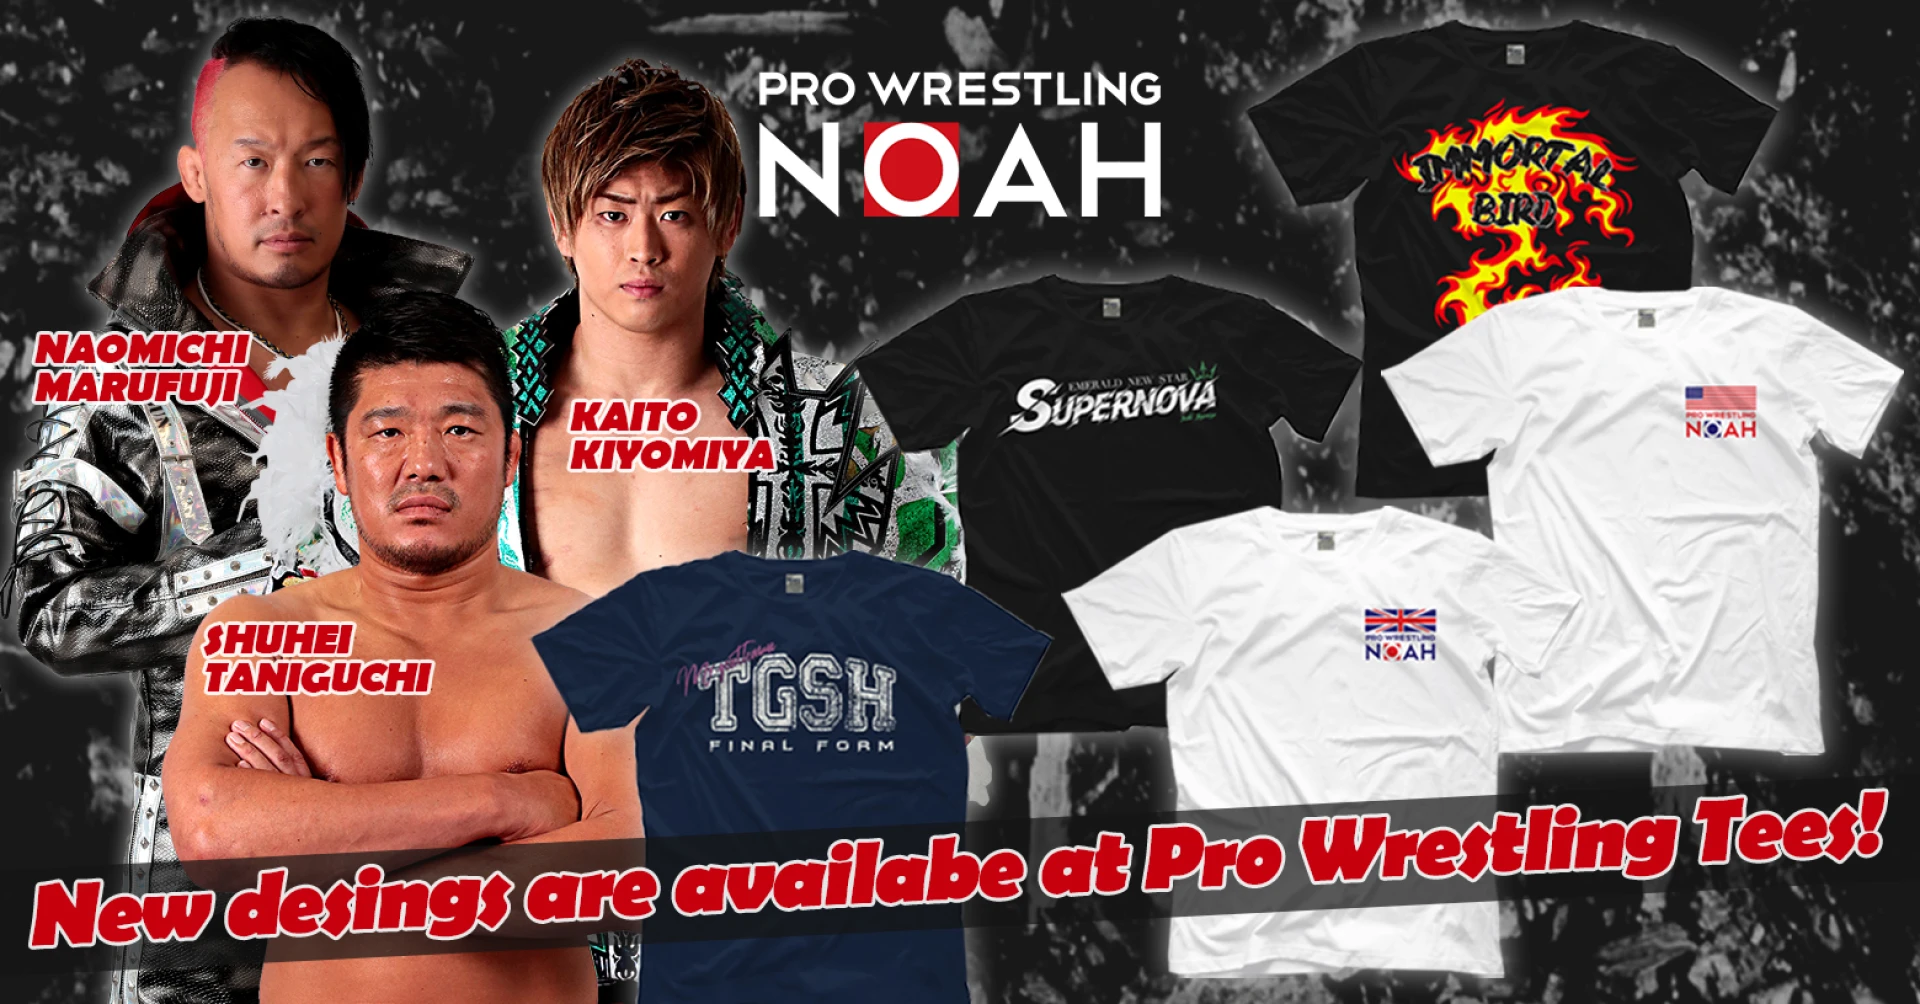 New desings are availabe at Pro Wrestling Tees!　／　"prowrestlingtees"に新商品が登場！